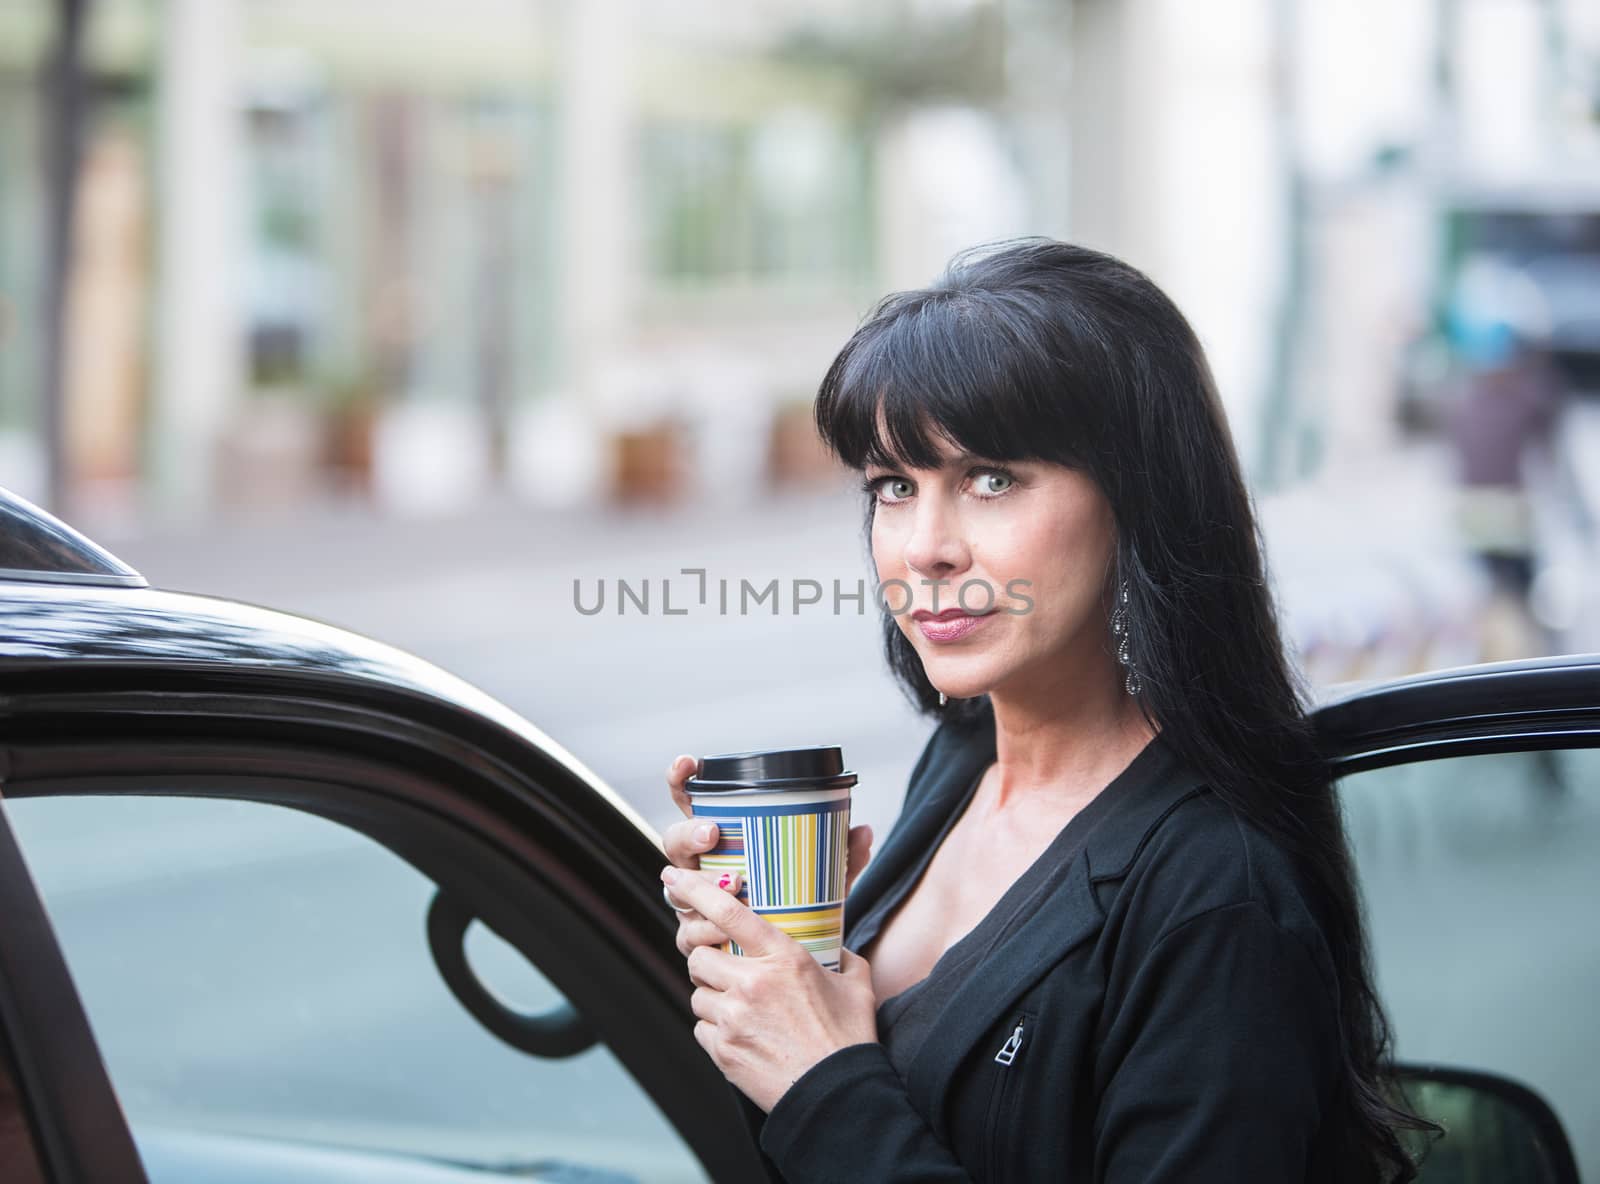 Attractive woman downtown in the morning with coffee cup